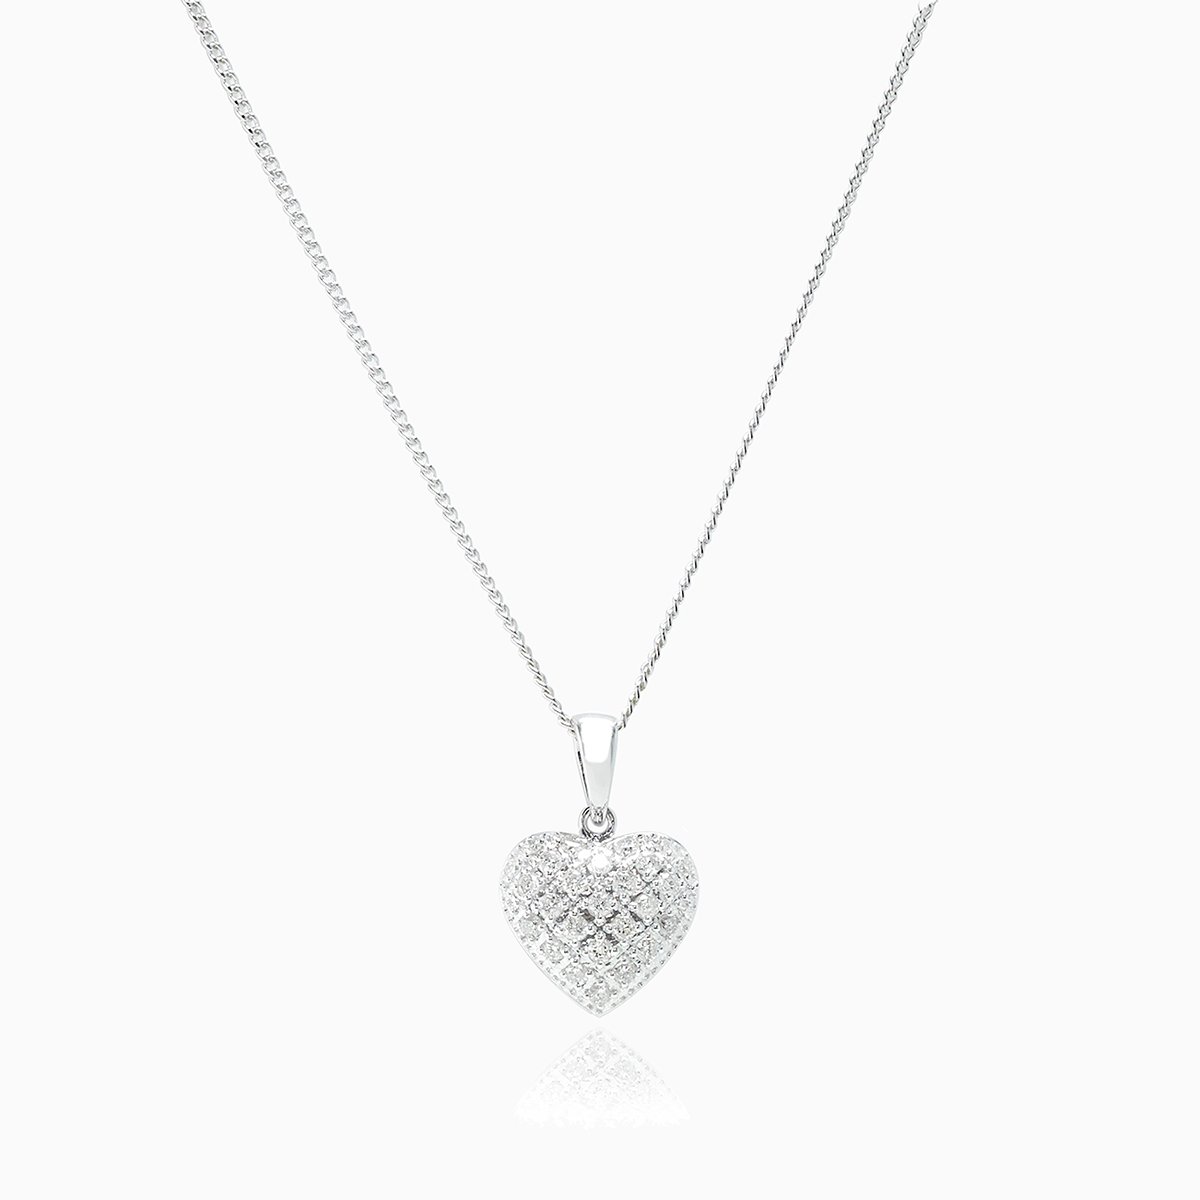 Petite 9 ct white gold heart locket pave set with diamonds on a 9 ct white gold curb chain.